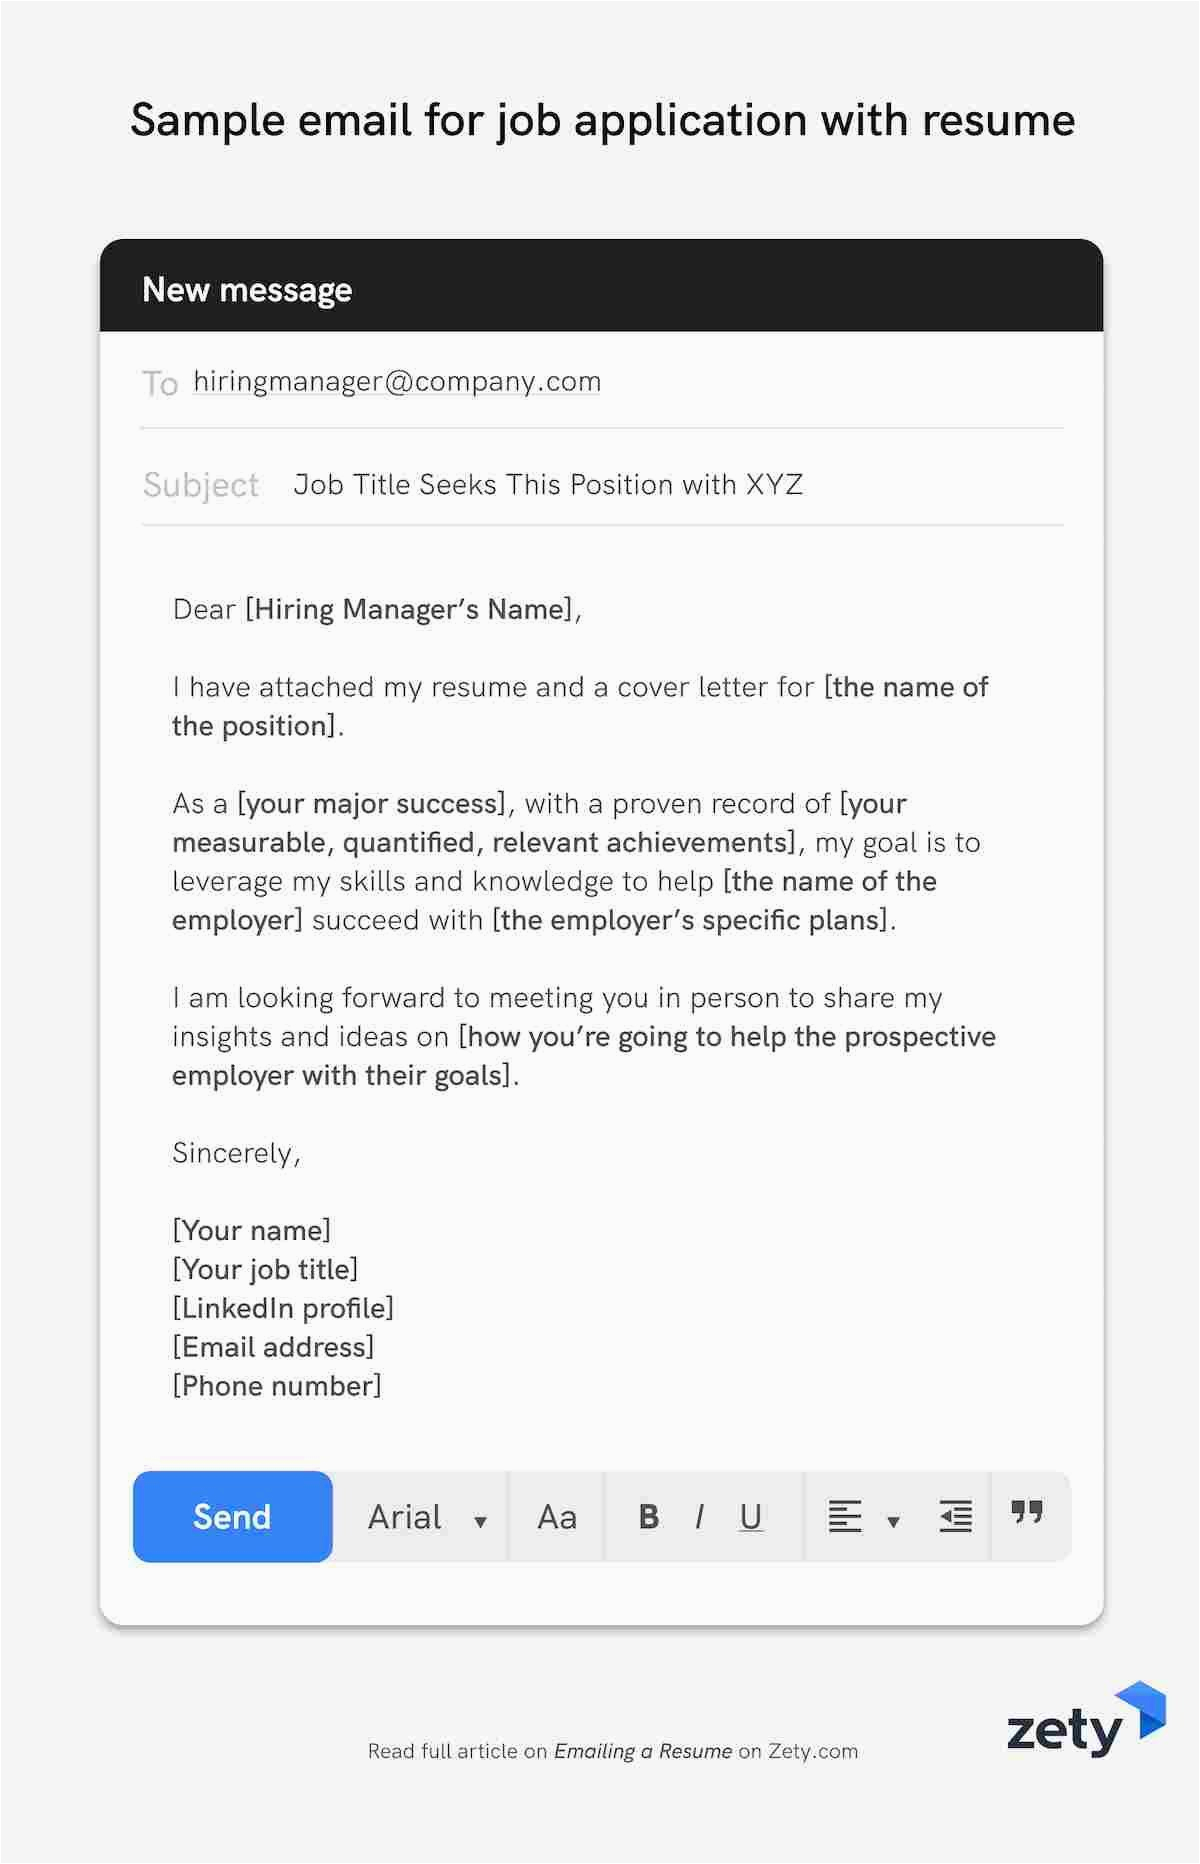 Job Application Sample Email to Send Resume for Job How to Email A Resume and Cover Letter to An Employer